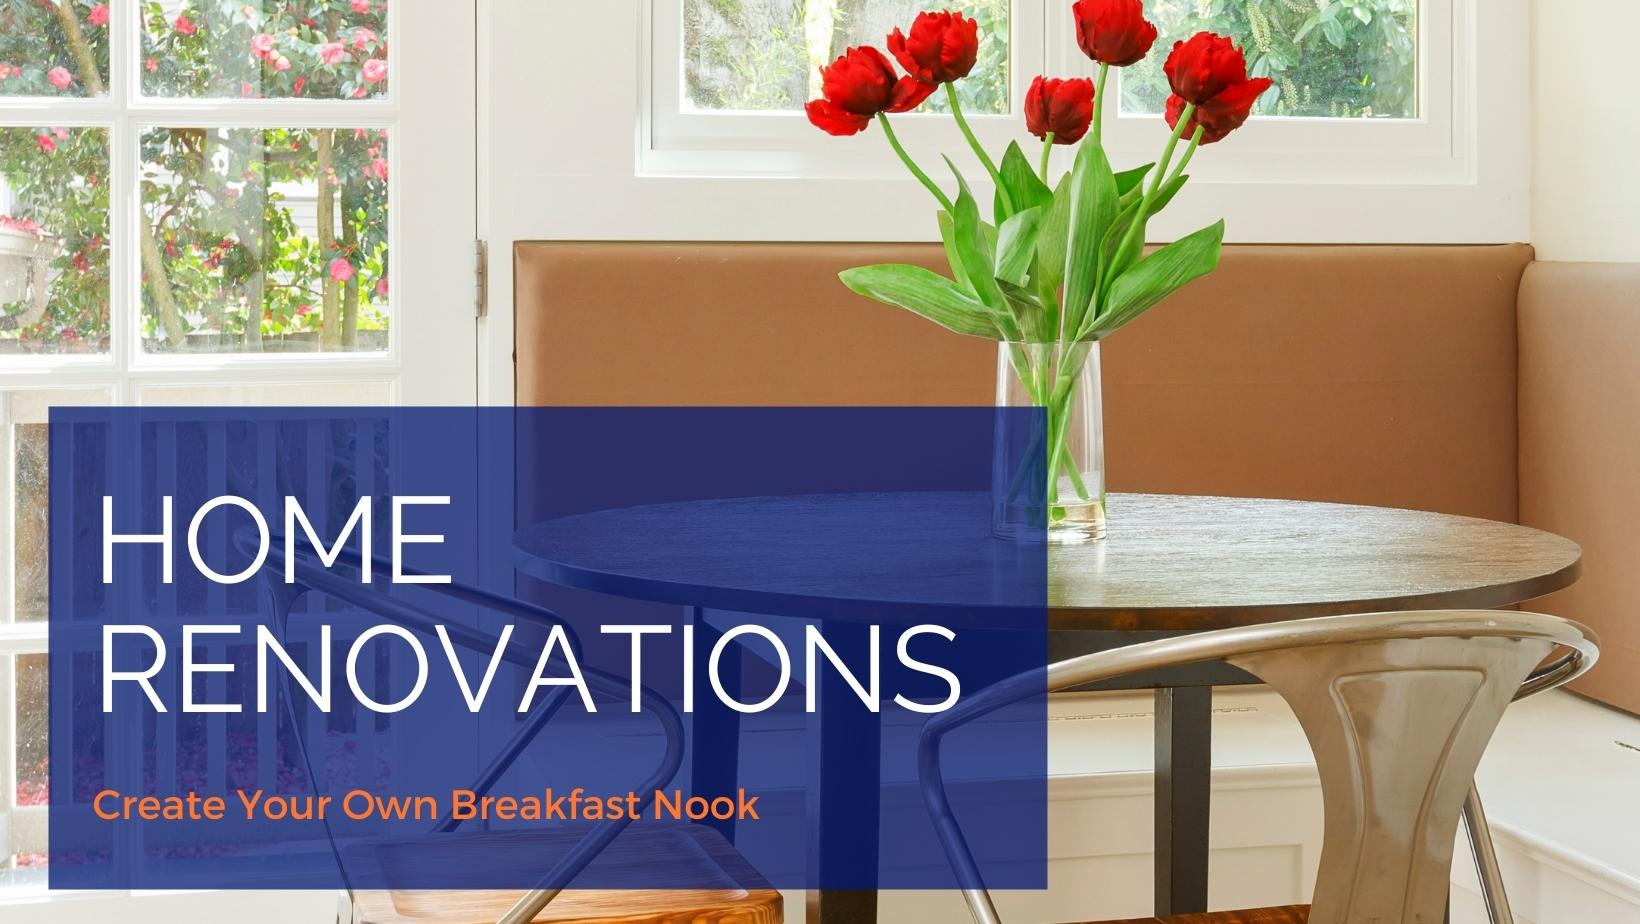 Breakfast nook with floors on the table "Home renovations, creating your own breakfast nook"